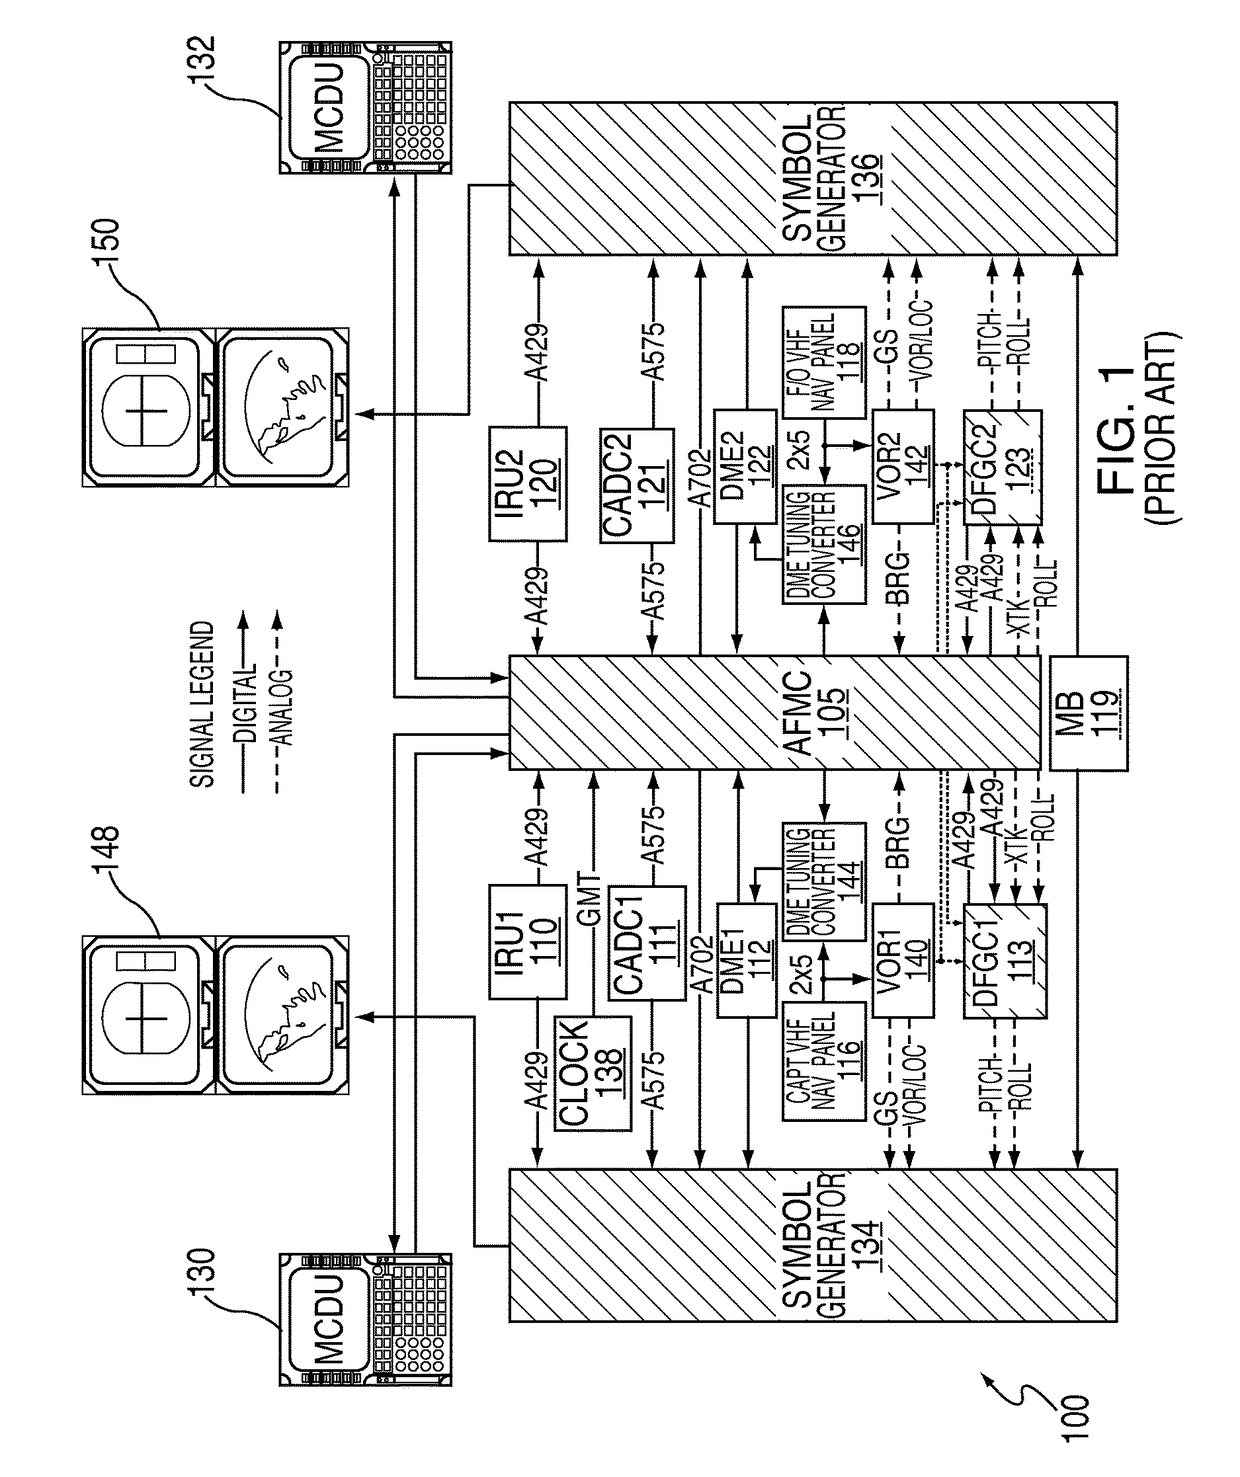 Upgraded flight management system for autopilot control and method of providing the same